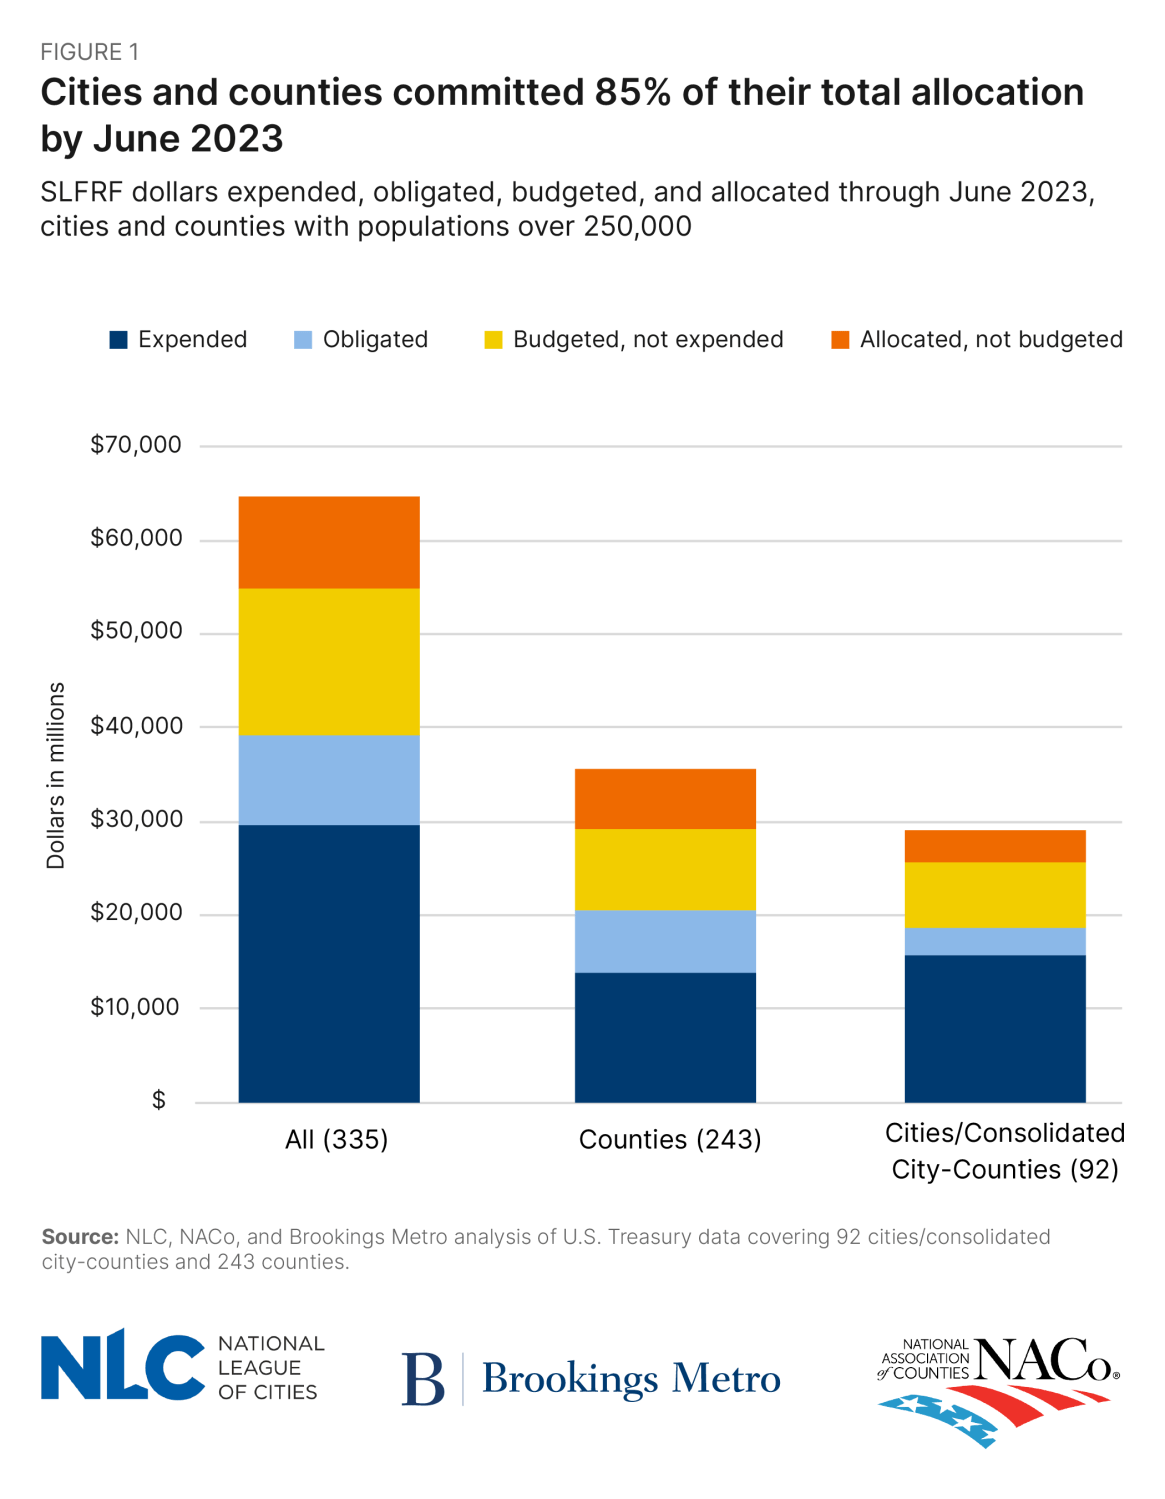 Figure 1: Cities and counties committed 85% of their total allocation by June 2023